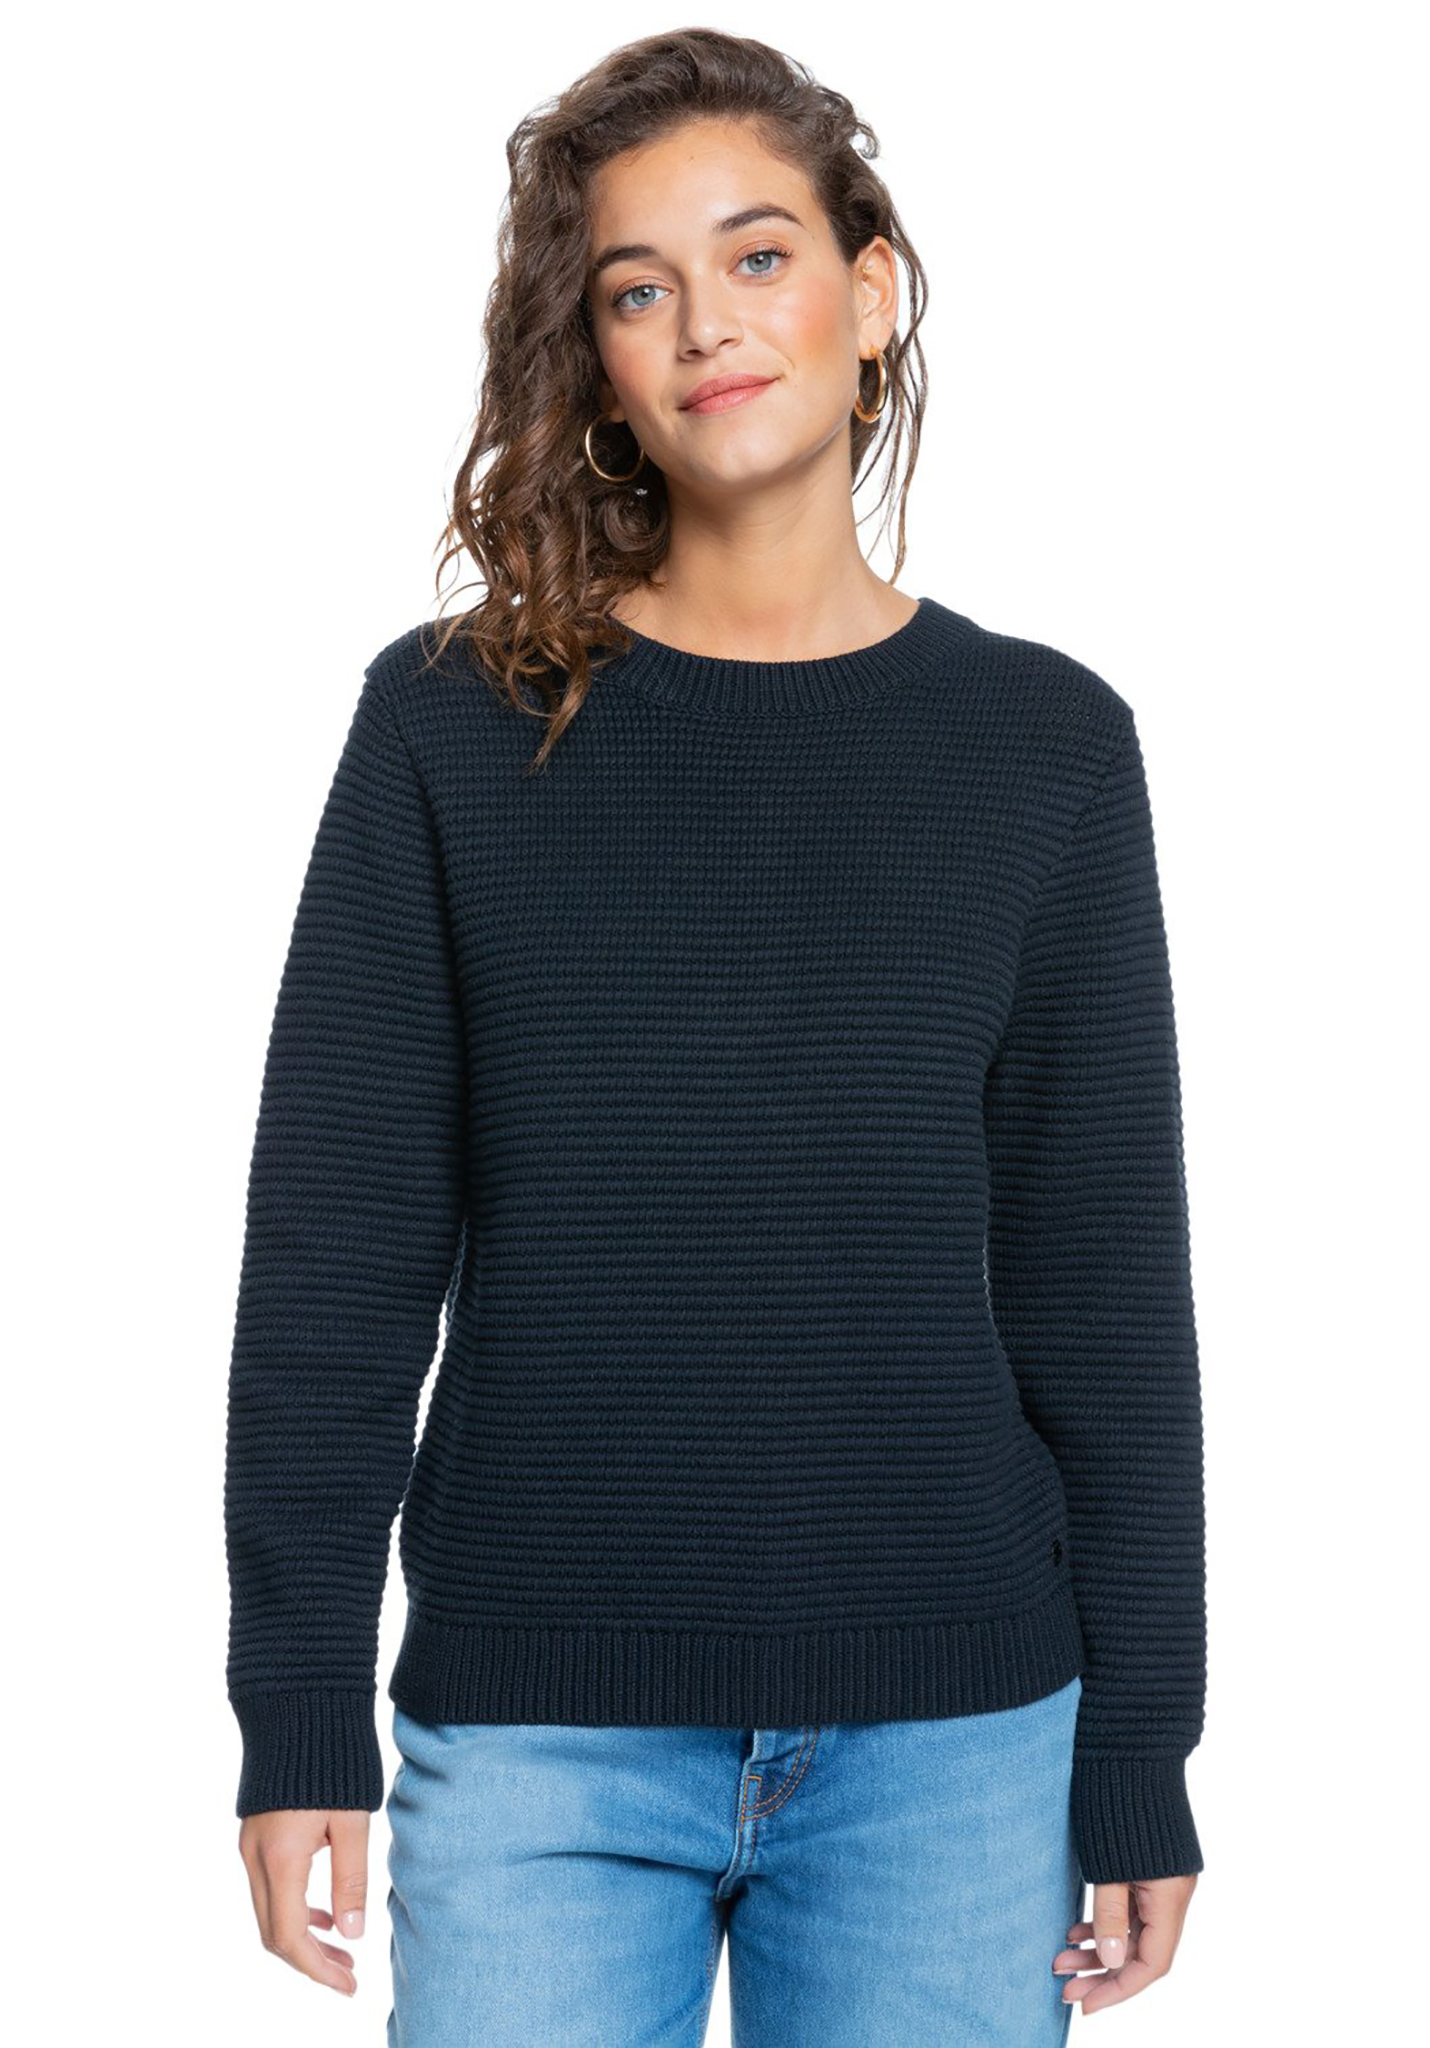 Roxy Sorry About You Strickpullover anthracite M